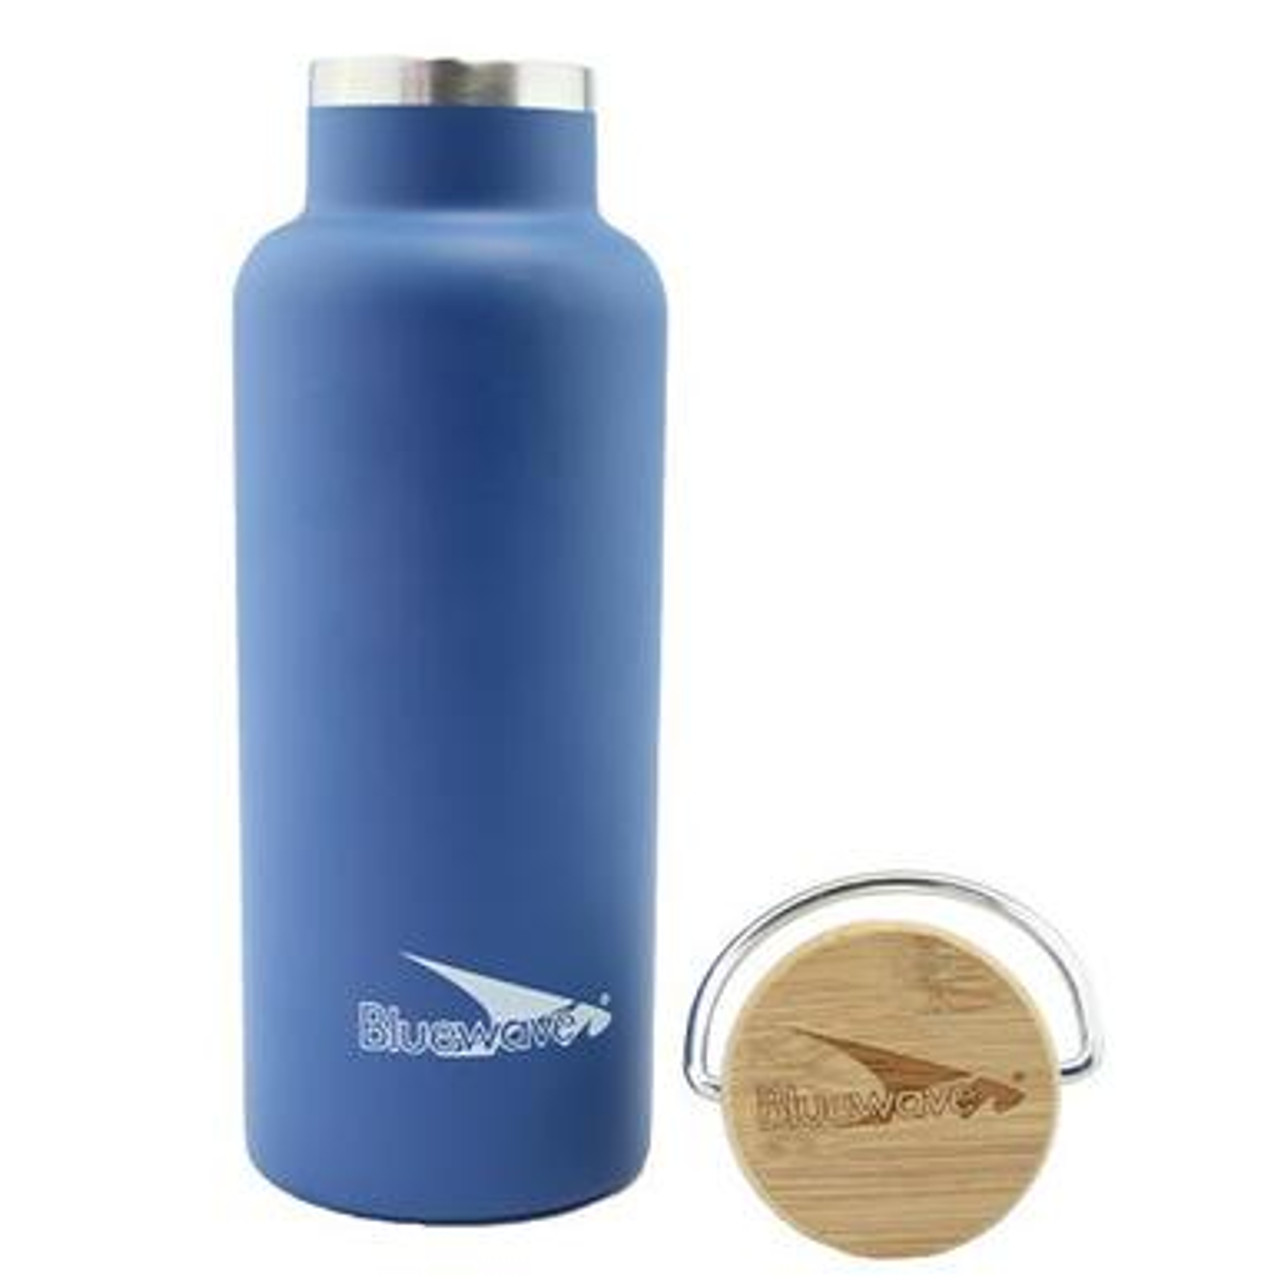 https://cdn11.bigcommerce.com/s-ovptlwt64t/images/stencil/1280x1280/products/508/2051/D2-Insulated-Water-Bottle-500ml-17oz-Navy-Blue-2__73574.1603649004.jpg?c=1?imbypass=on